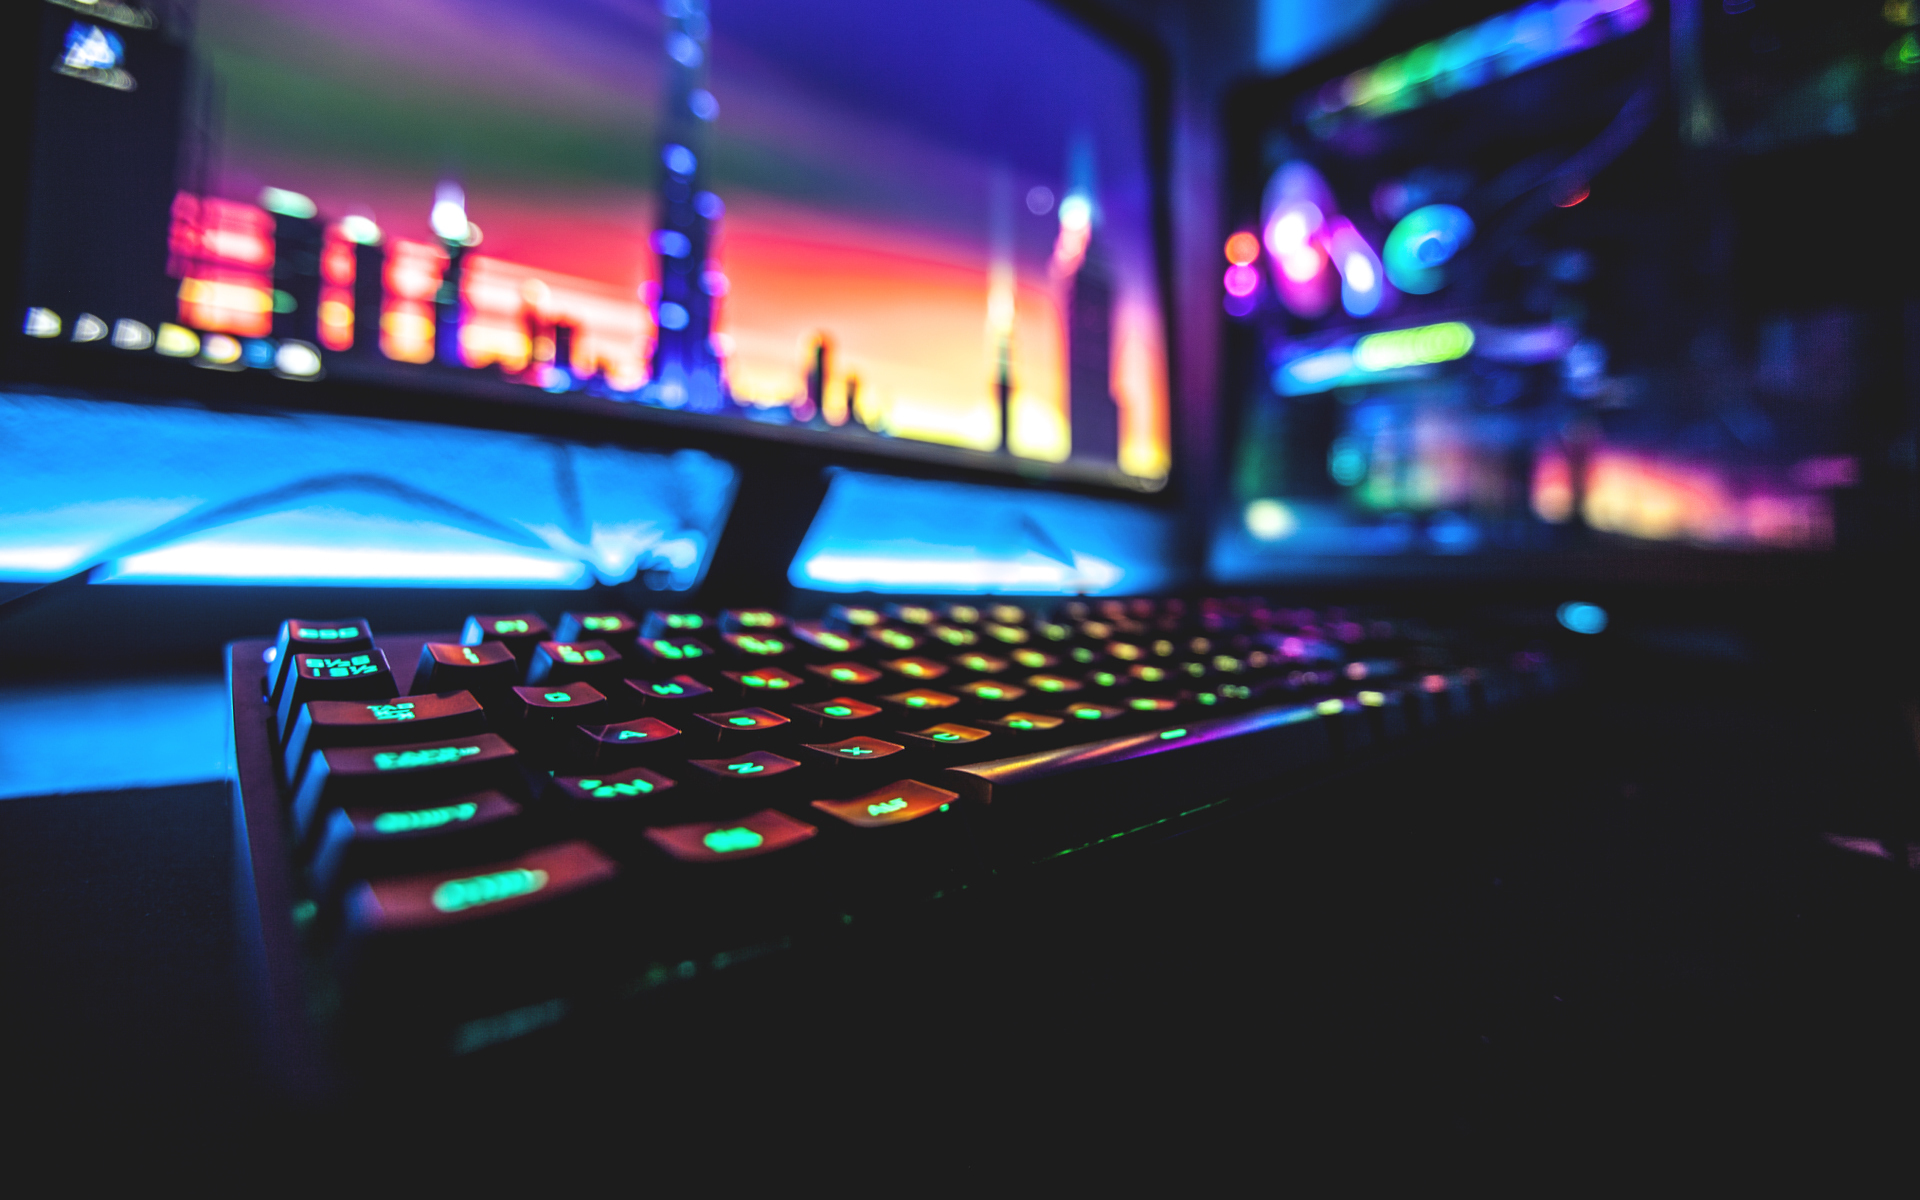 colorful, Neon, Computer, Keyboards, PC gaming Wallpapers HD / Desktop